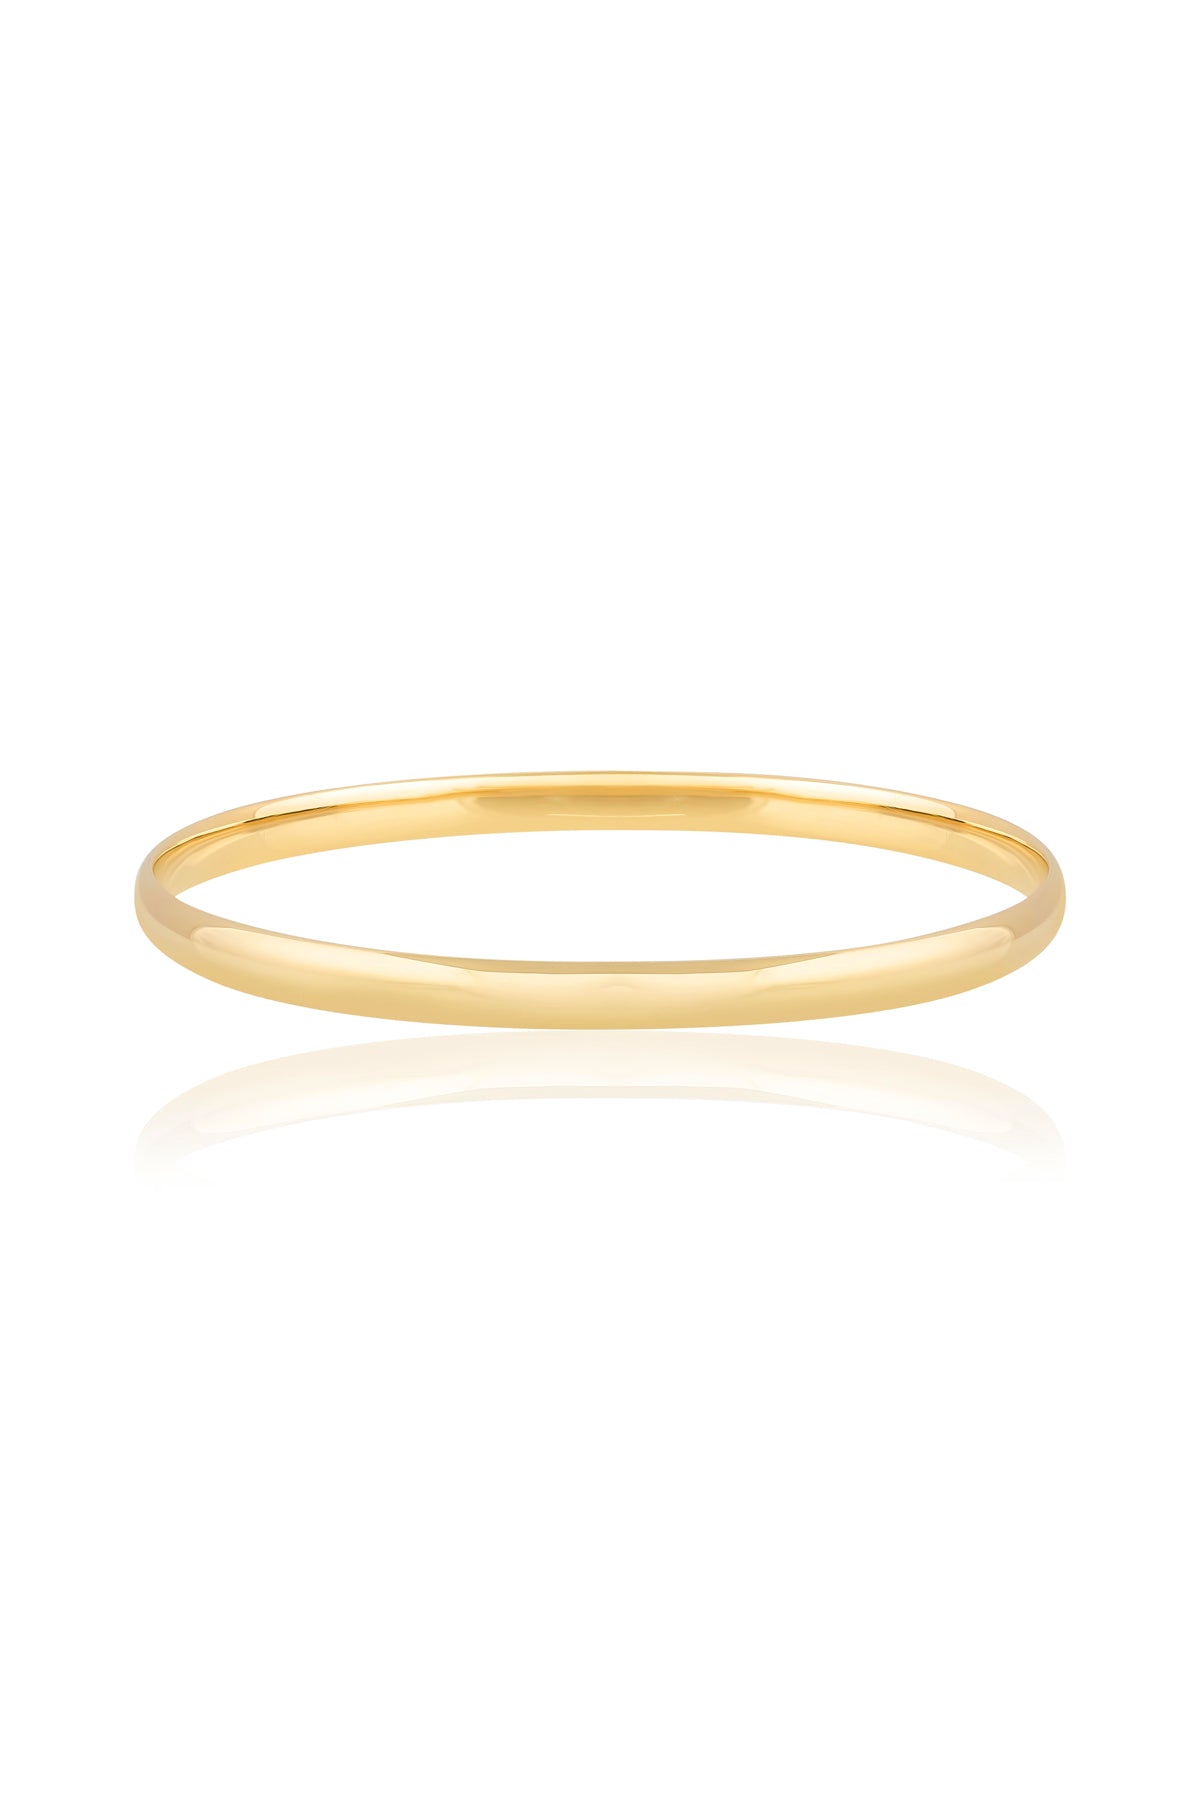 Timeless 9 Carat Yellow Gold 5mm Bangle from LeGassick Jewellery.